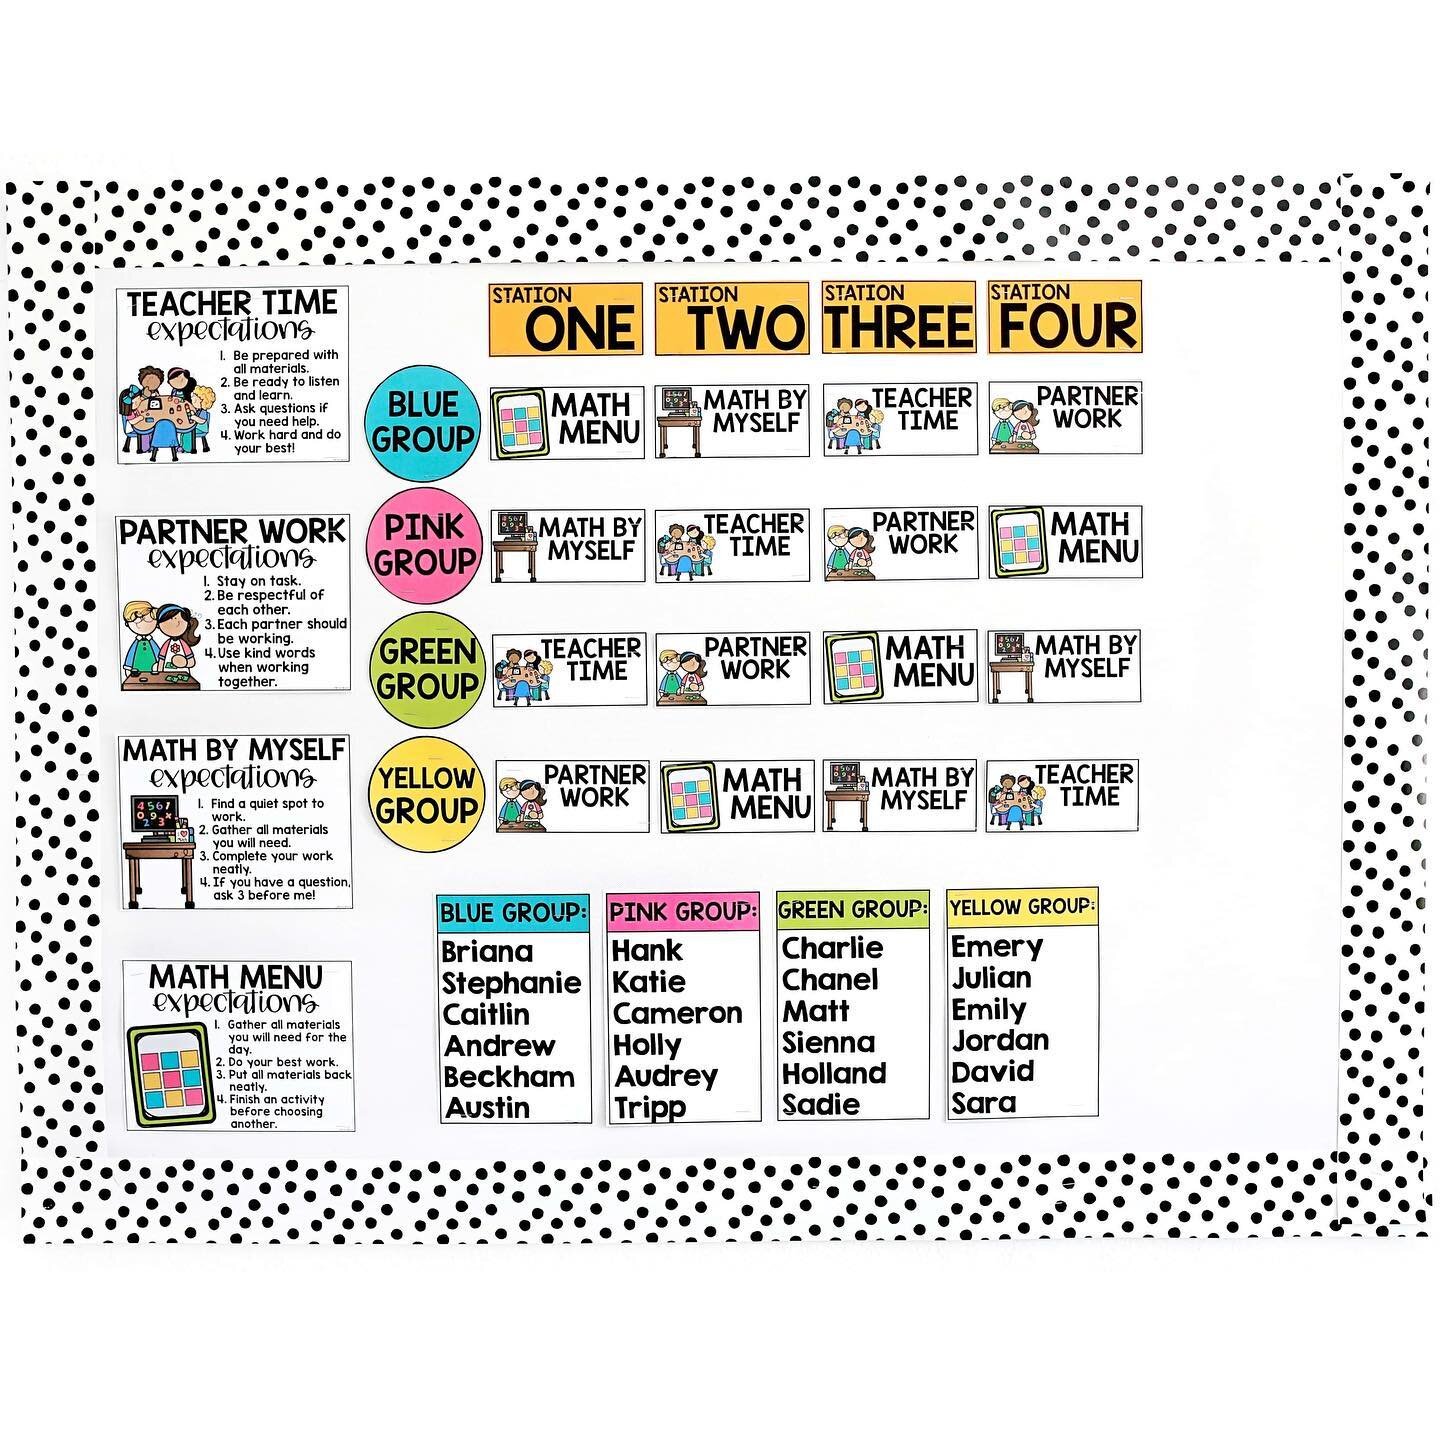 My Math Stations rotations board has gotten a biiig update, and I'm kind of in love! 😍 It includes editable *everything* so that you can perfectly customize it for your own classroom. The expectations posters might be my favorite - post these around